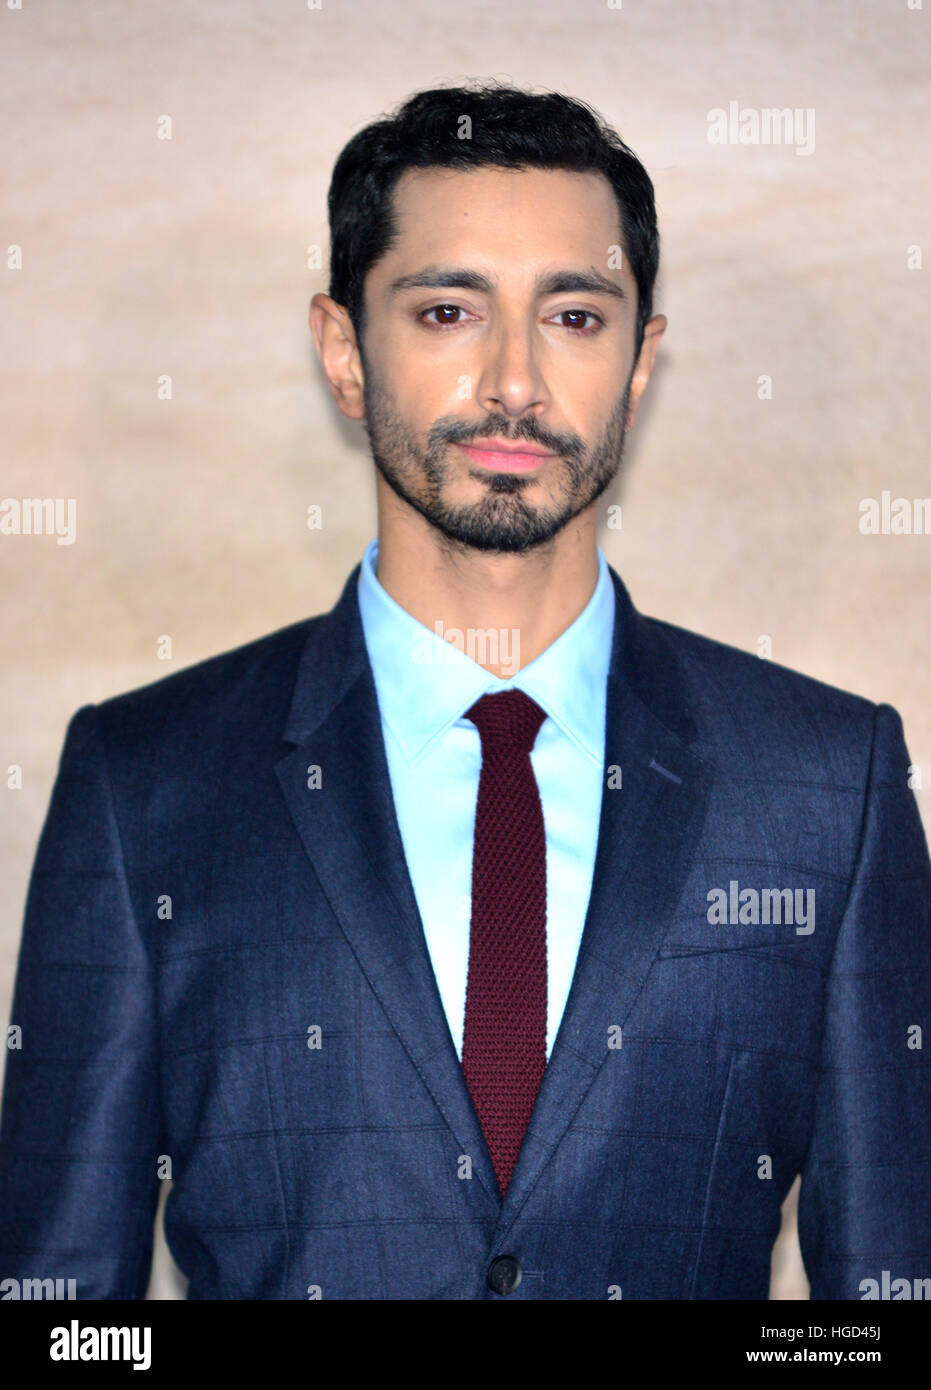 Riz Ahmed  at the 'Rogue One: A Star Wars Story' film premiere, Tate Modern, London, UK - 13 Dec 2016 Stock Photo